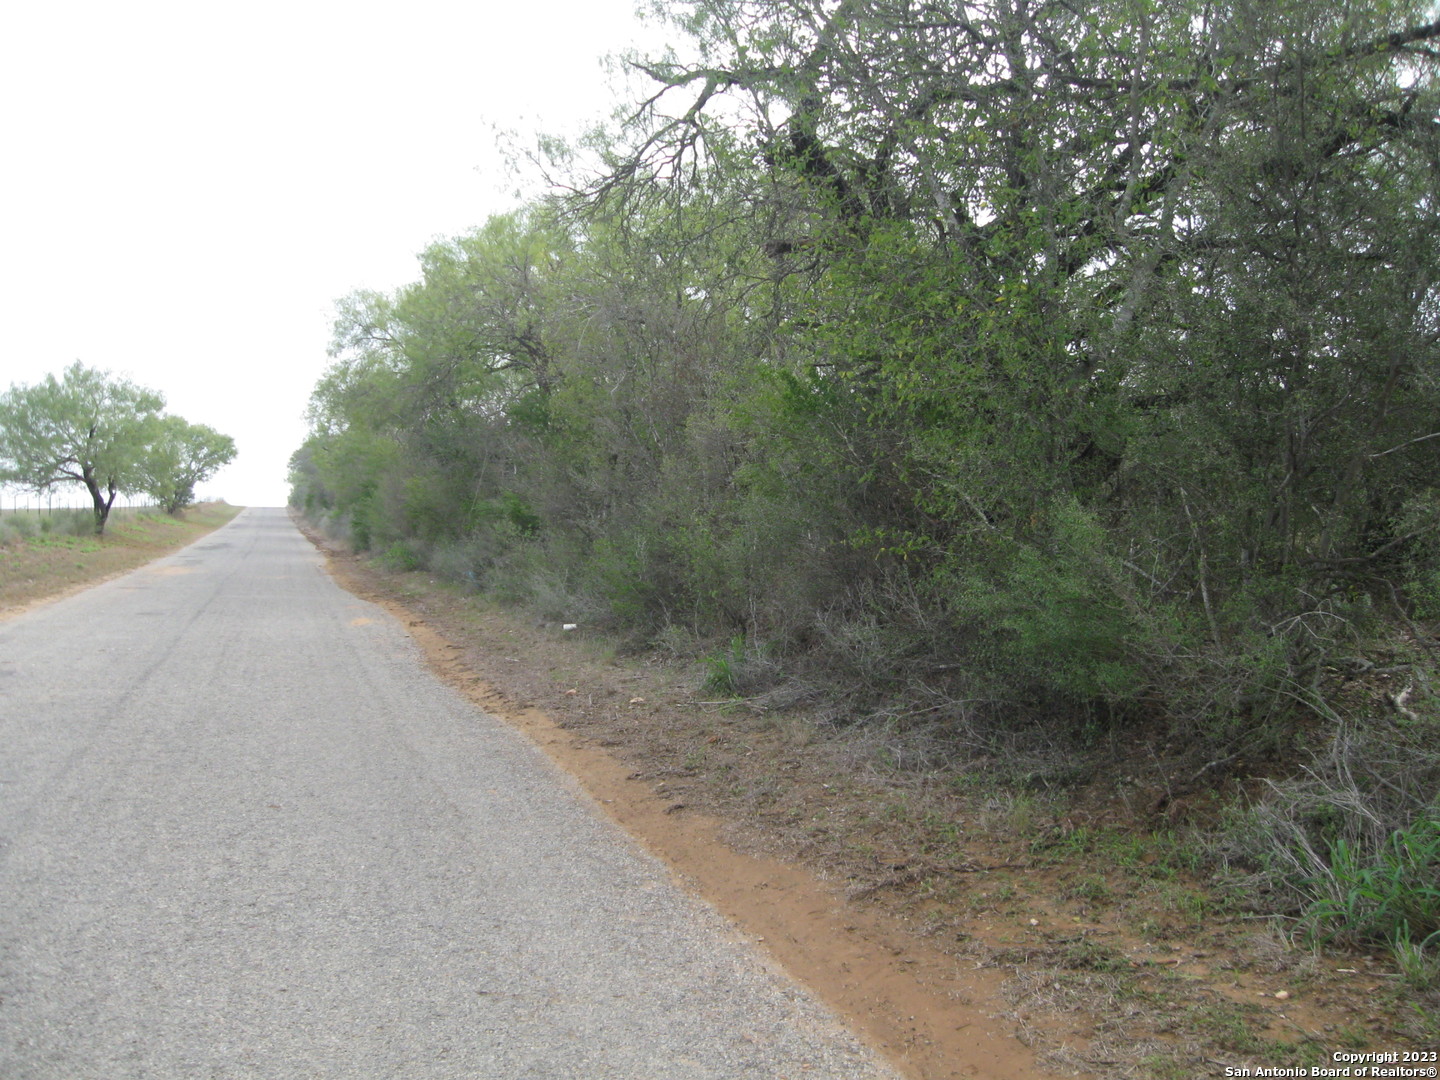 a view of a dirt road with trees